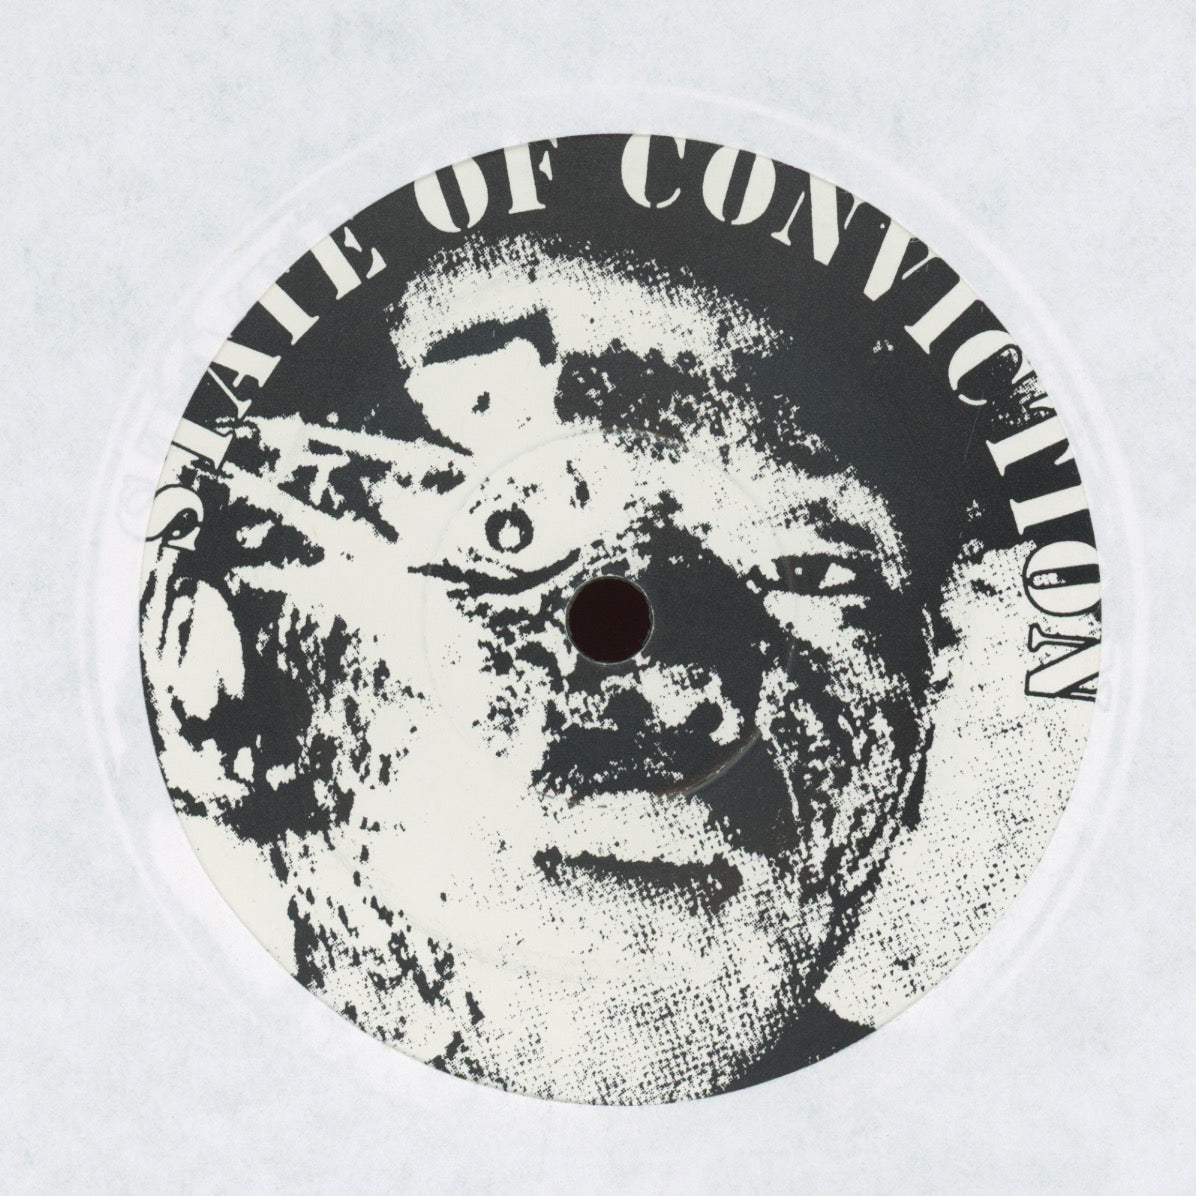 State of Conviction / To Kill is To Live - Thoughts Light Fires / To Kill Is To Live on Dog Collar 7" Grindcore With Pic Sleeve